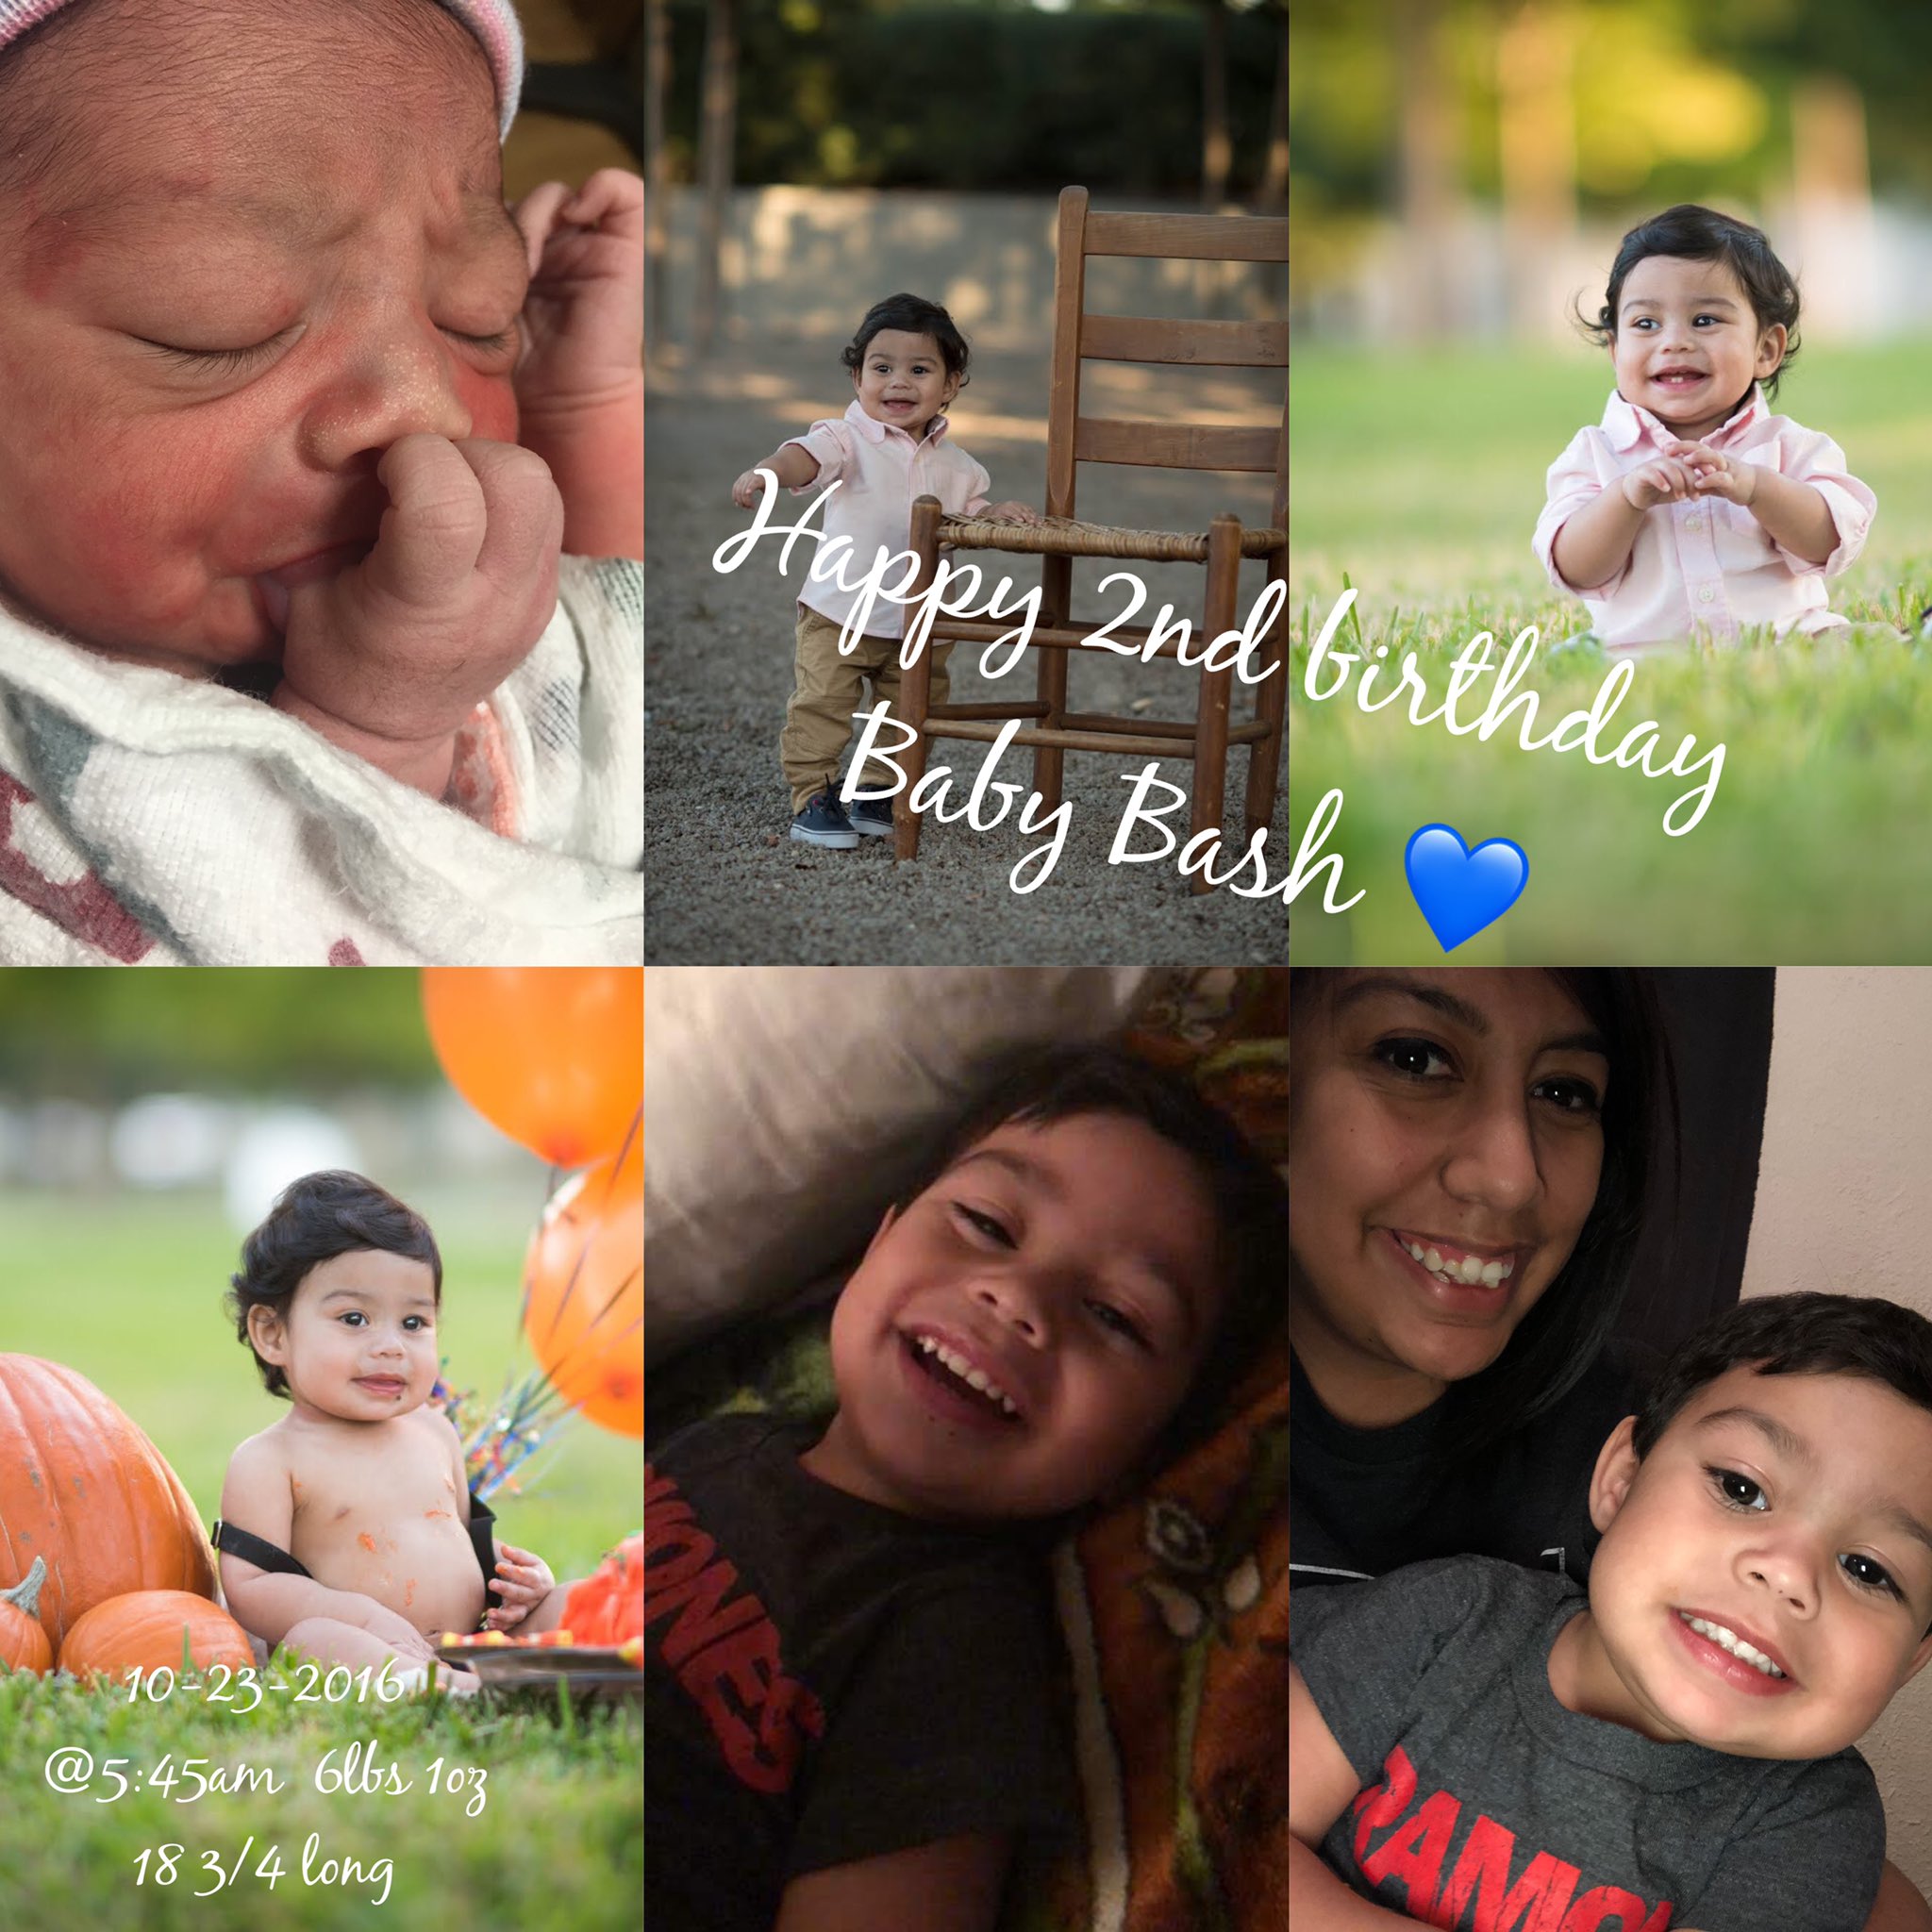 So if y all see me crying just know I have a 2yr old now  Happy birthday Baby Bash 